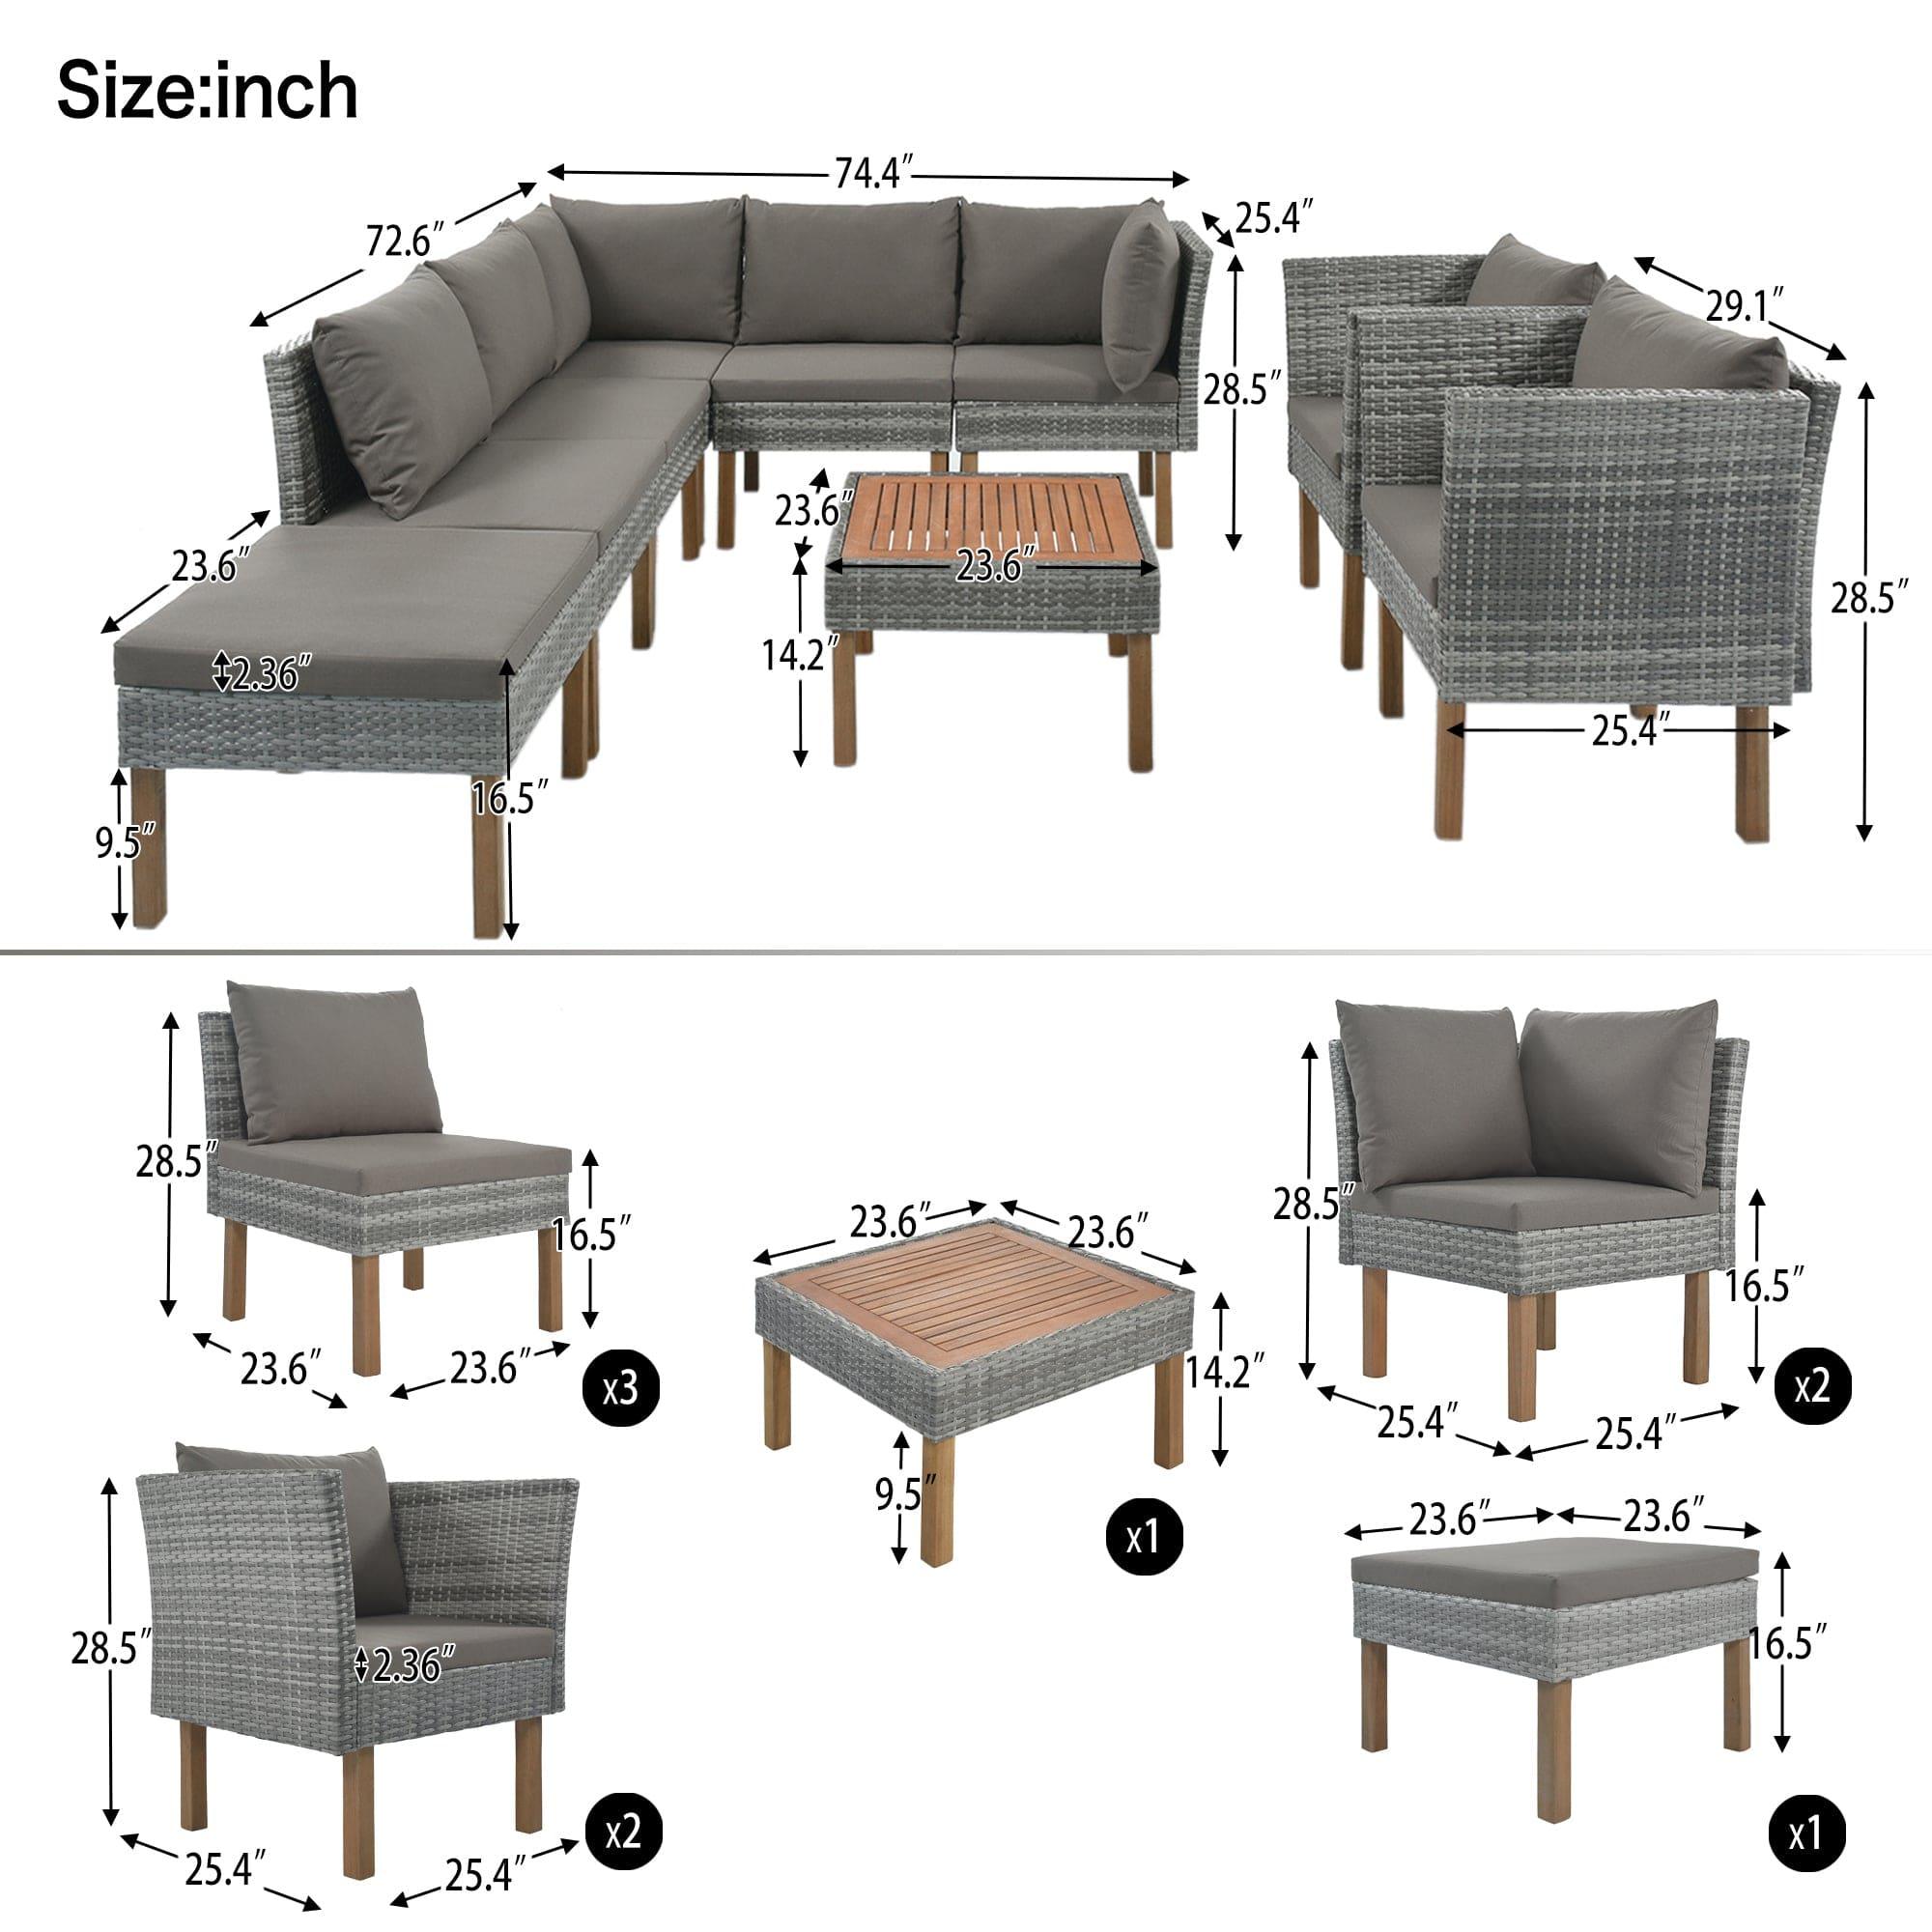 Shop GO 9-Piece Outdoor Patio Garden Wicker Sofa Set, Gray PE Rattan Sofa Set, with Wood Legs, Acacia Wood Tabletop, Armrest Chairs with Gray Cushions Mademoiselle Home Decor